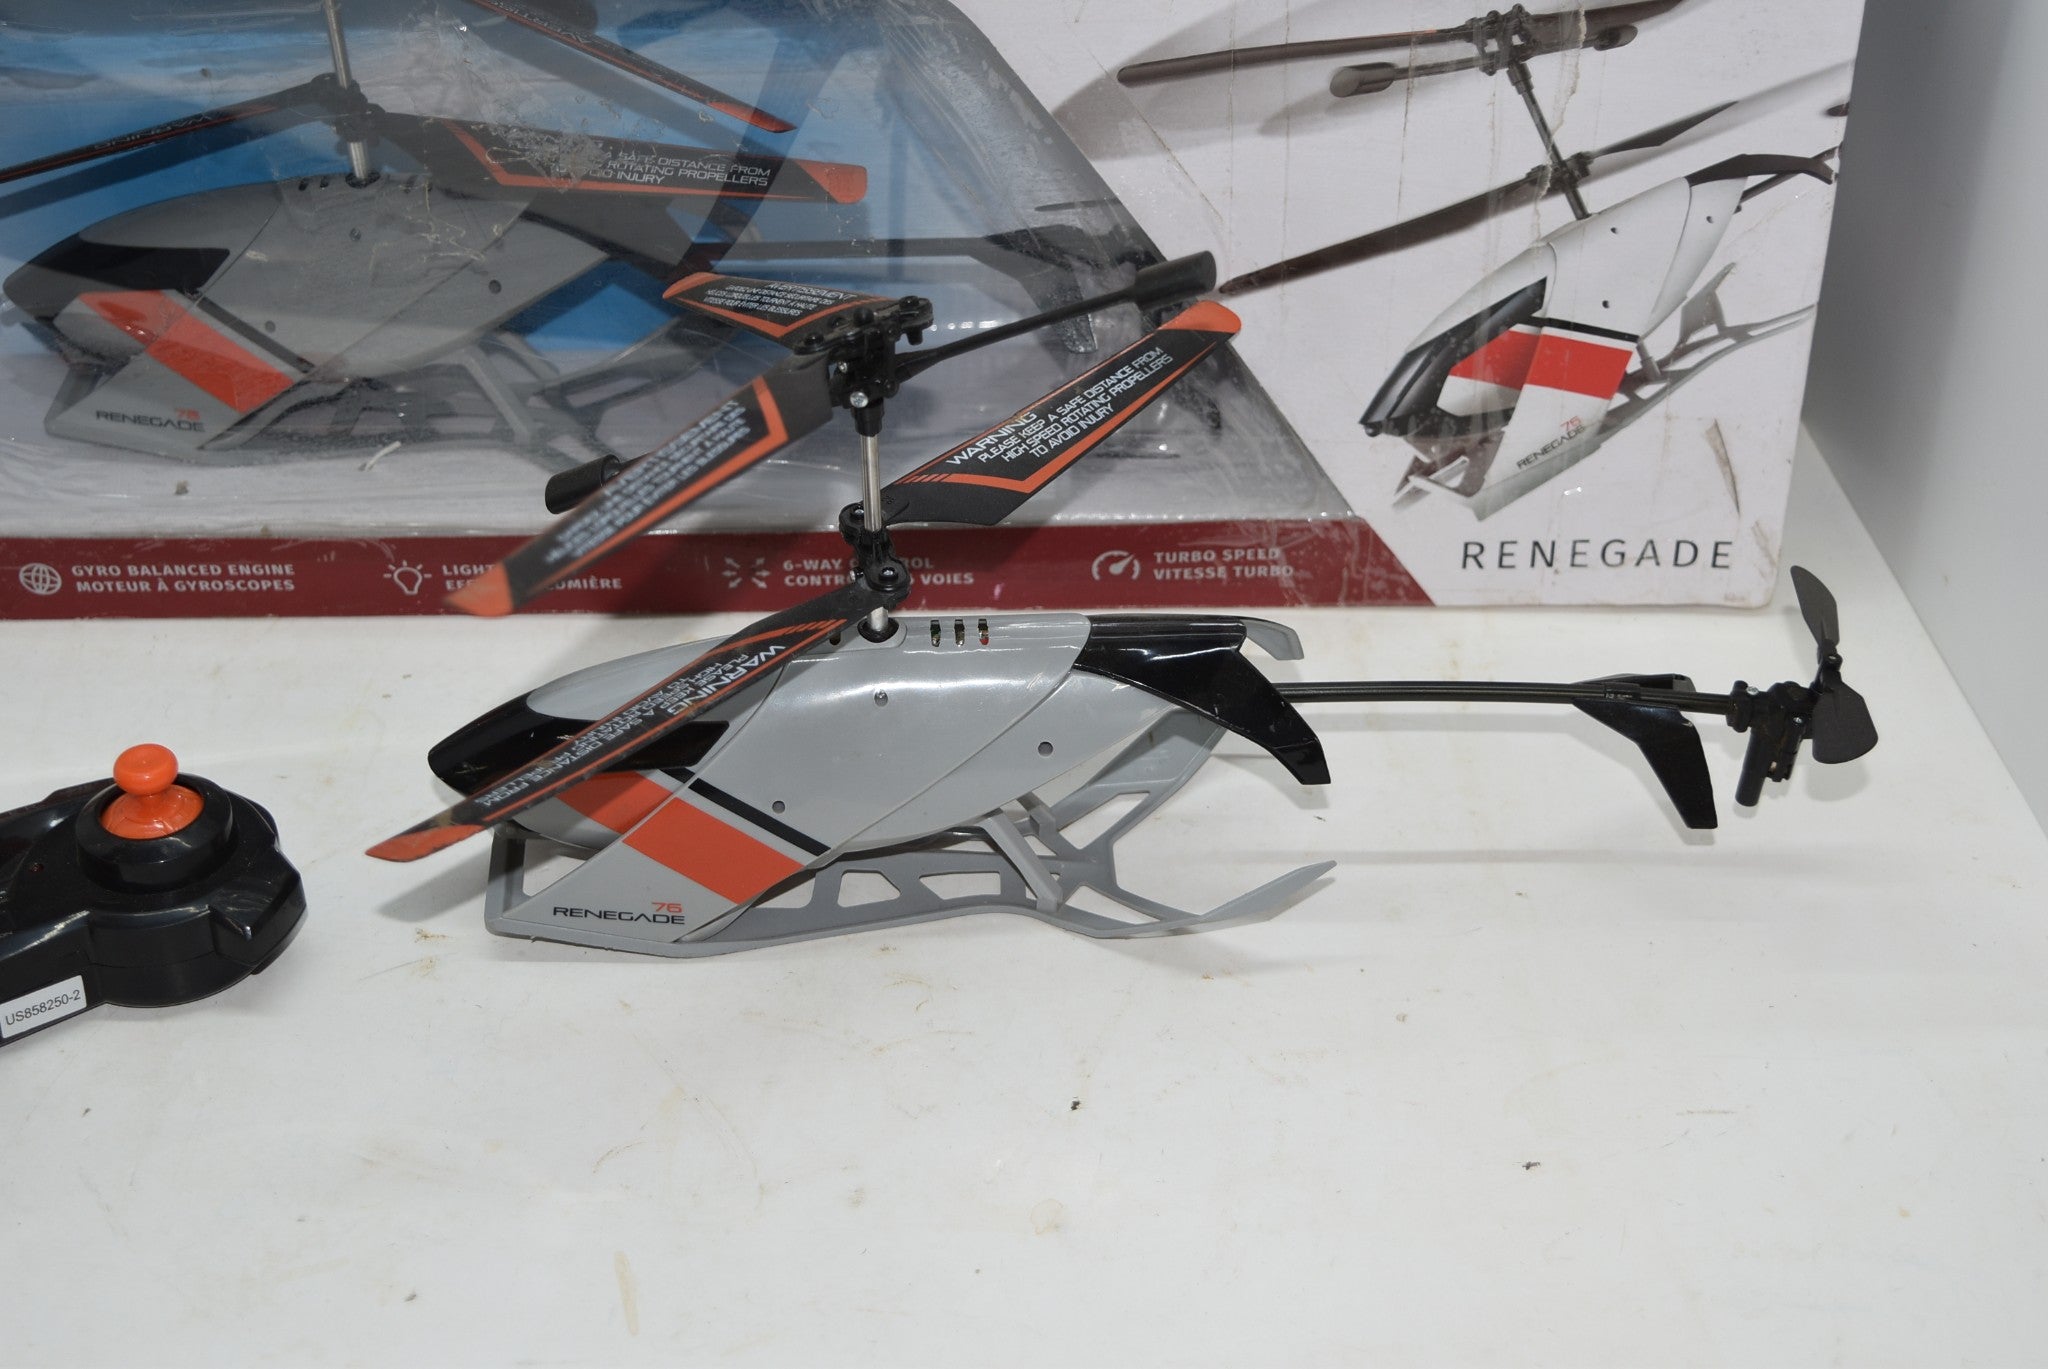 sky rover renegade helicopter